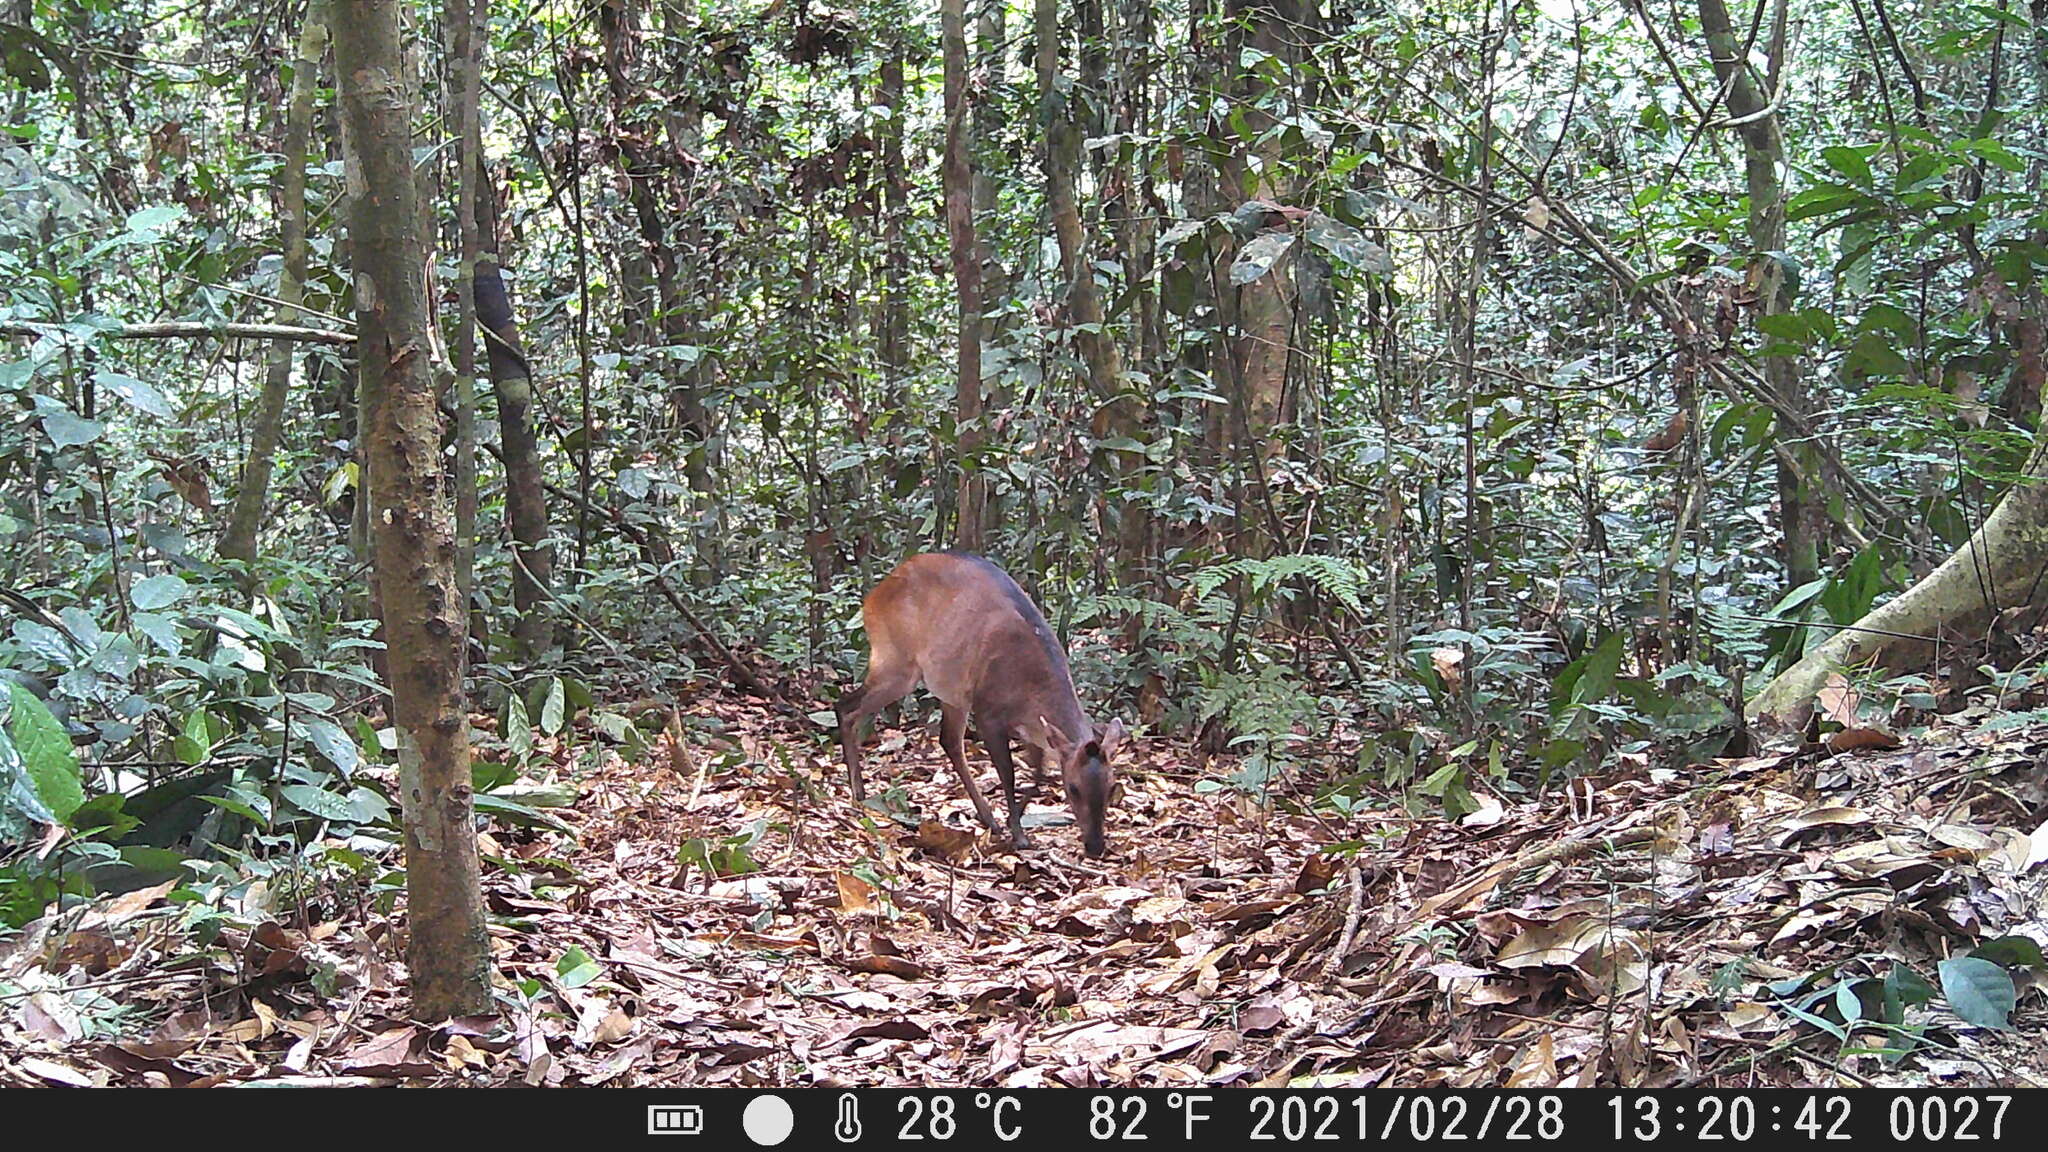 Image of white-bellied duiker